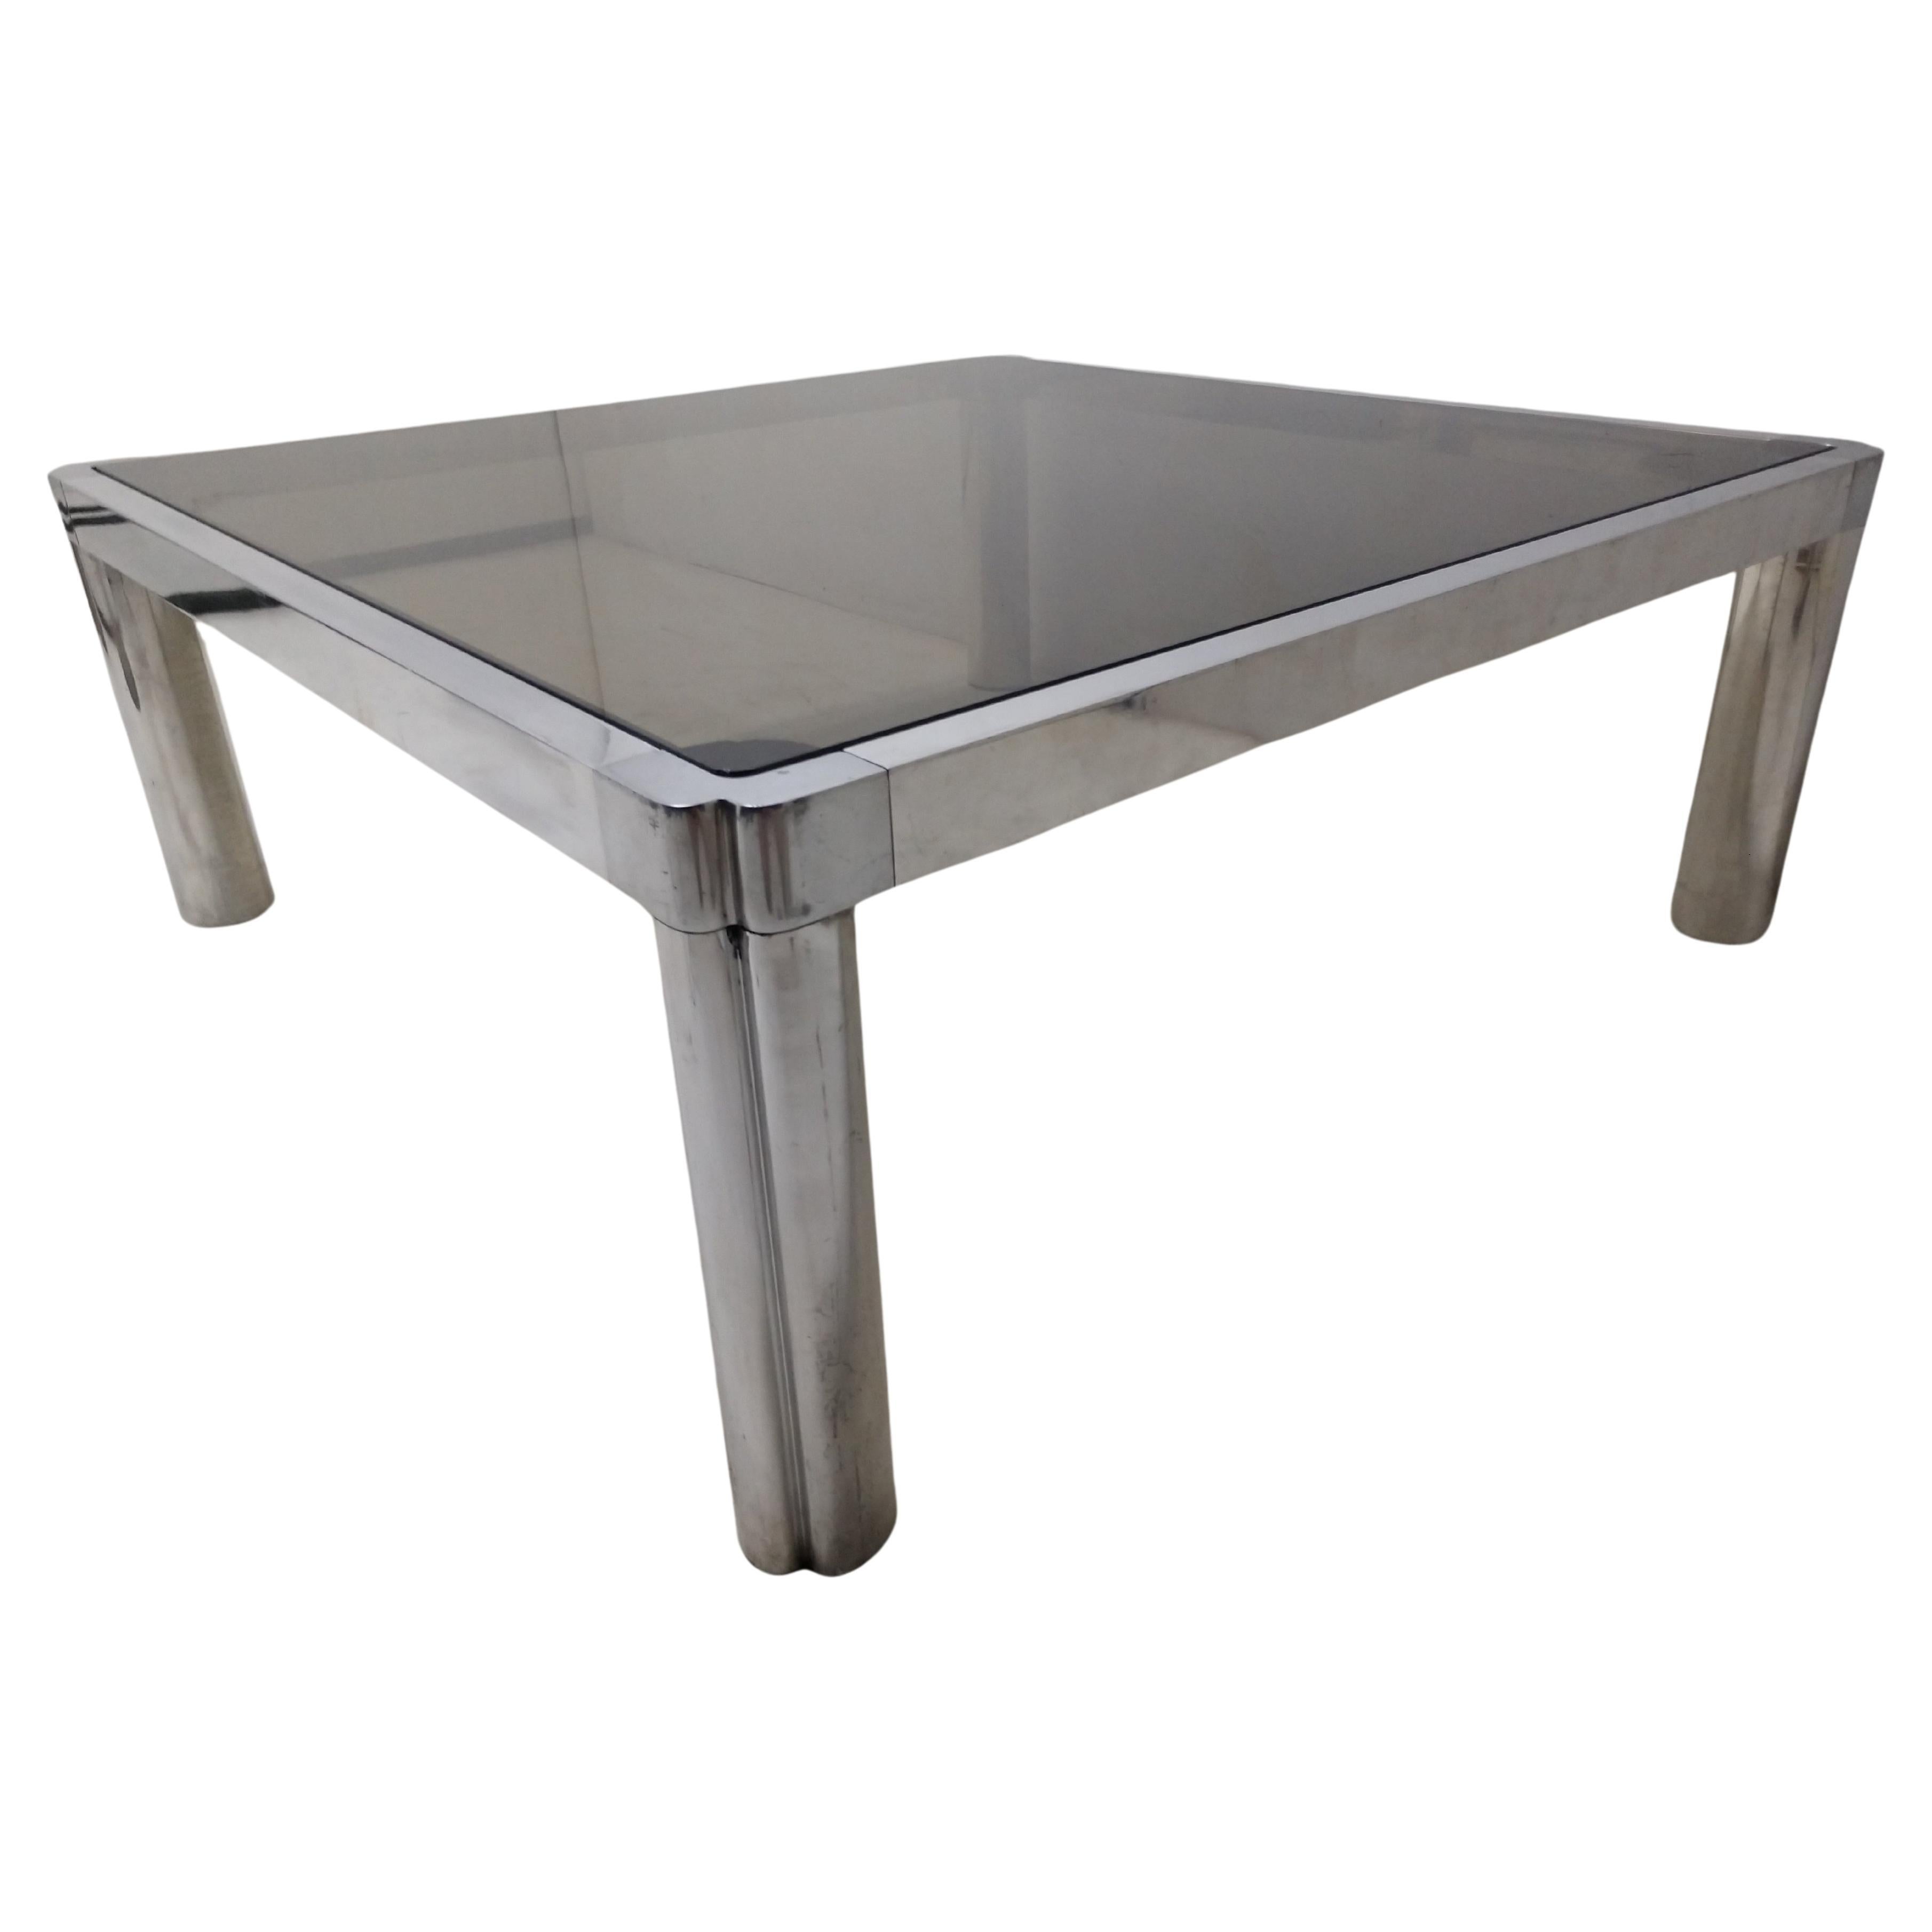 Fabulous cast aluminum cocktail table with a smoked glass top inset. Tube legs with flat bars connecting the sides. Well constructed piece as fittings are tight and precise. Some minimal scratches to both the frame and the glass. Rubber bumper